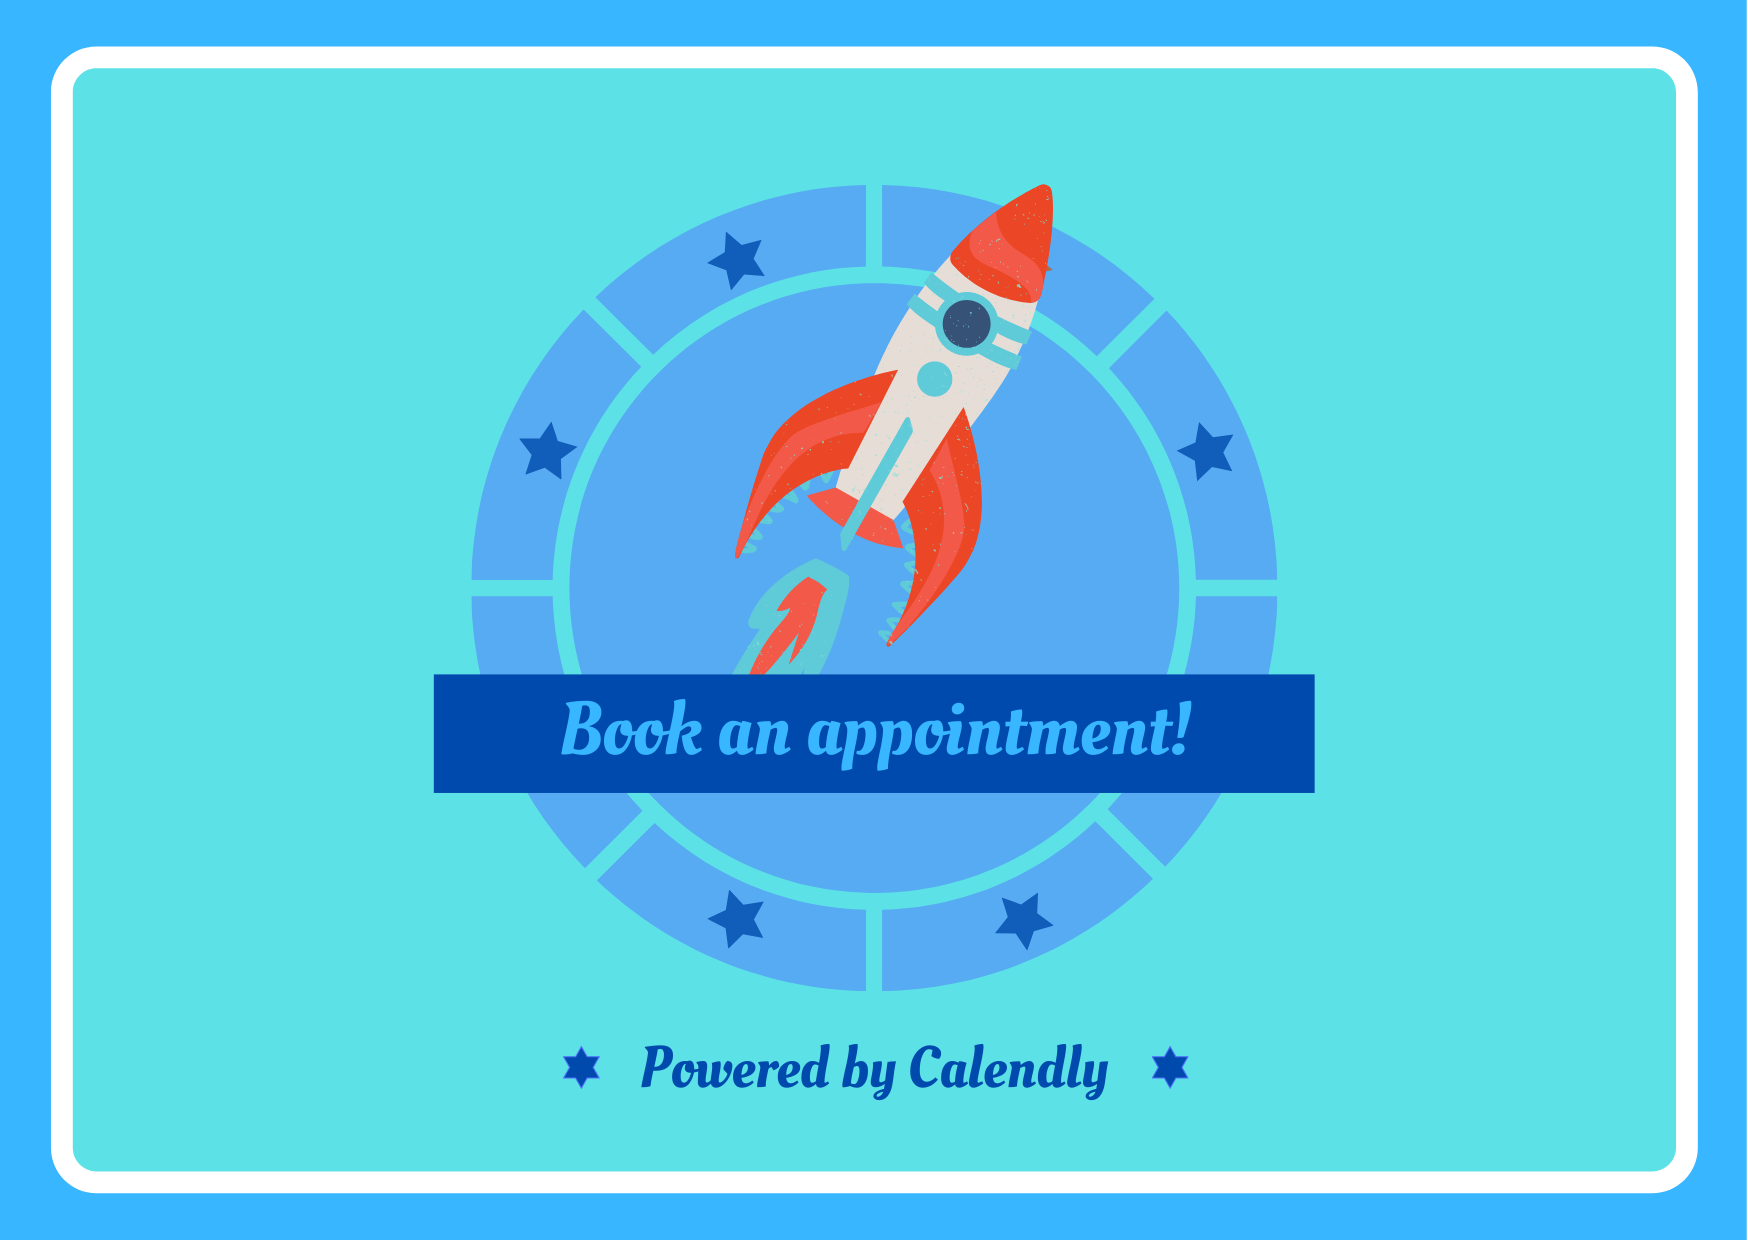 Appointment Booking banner